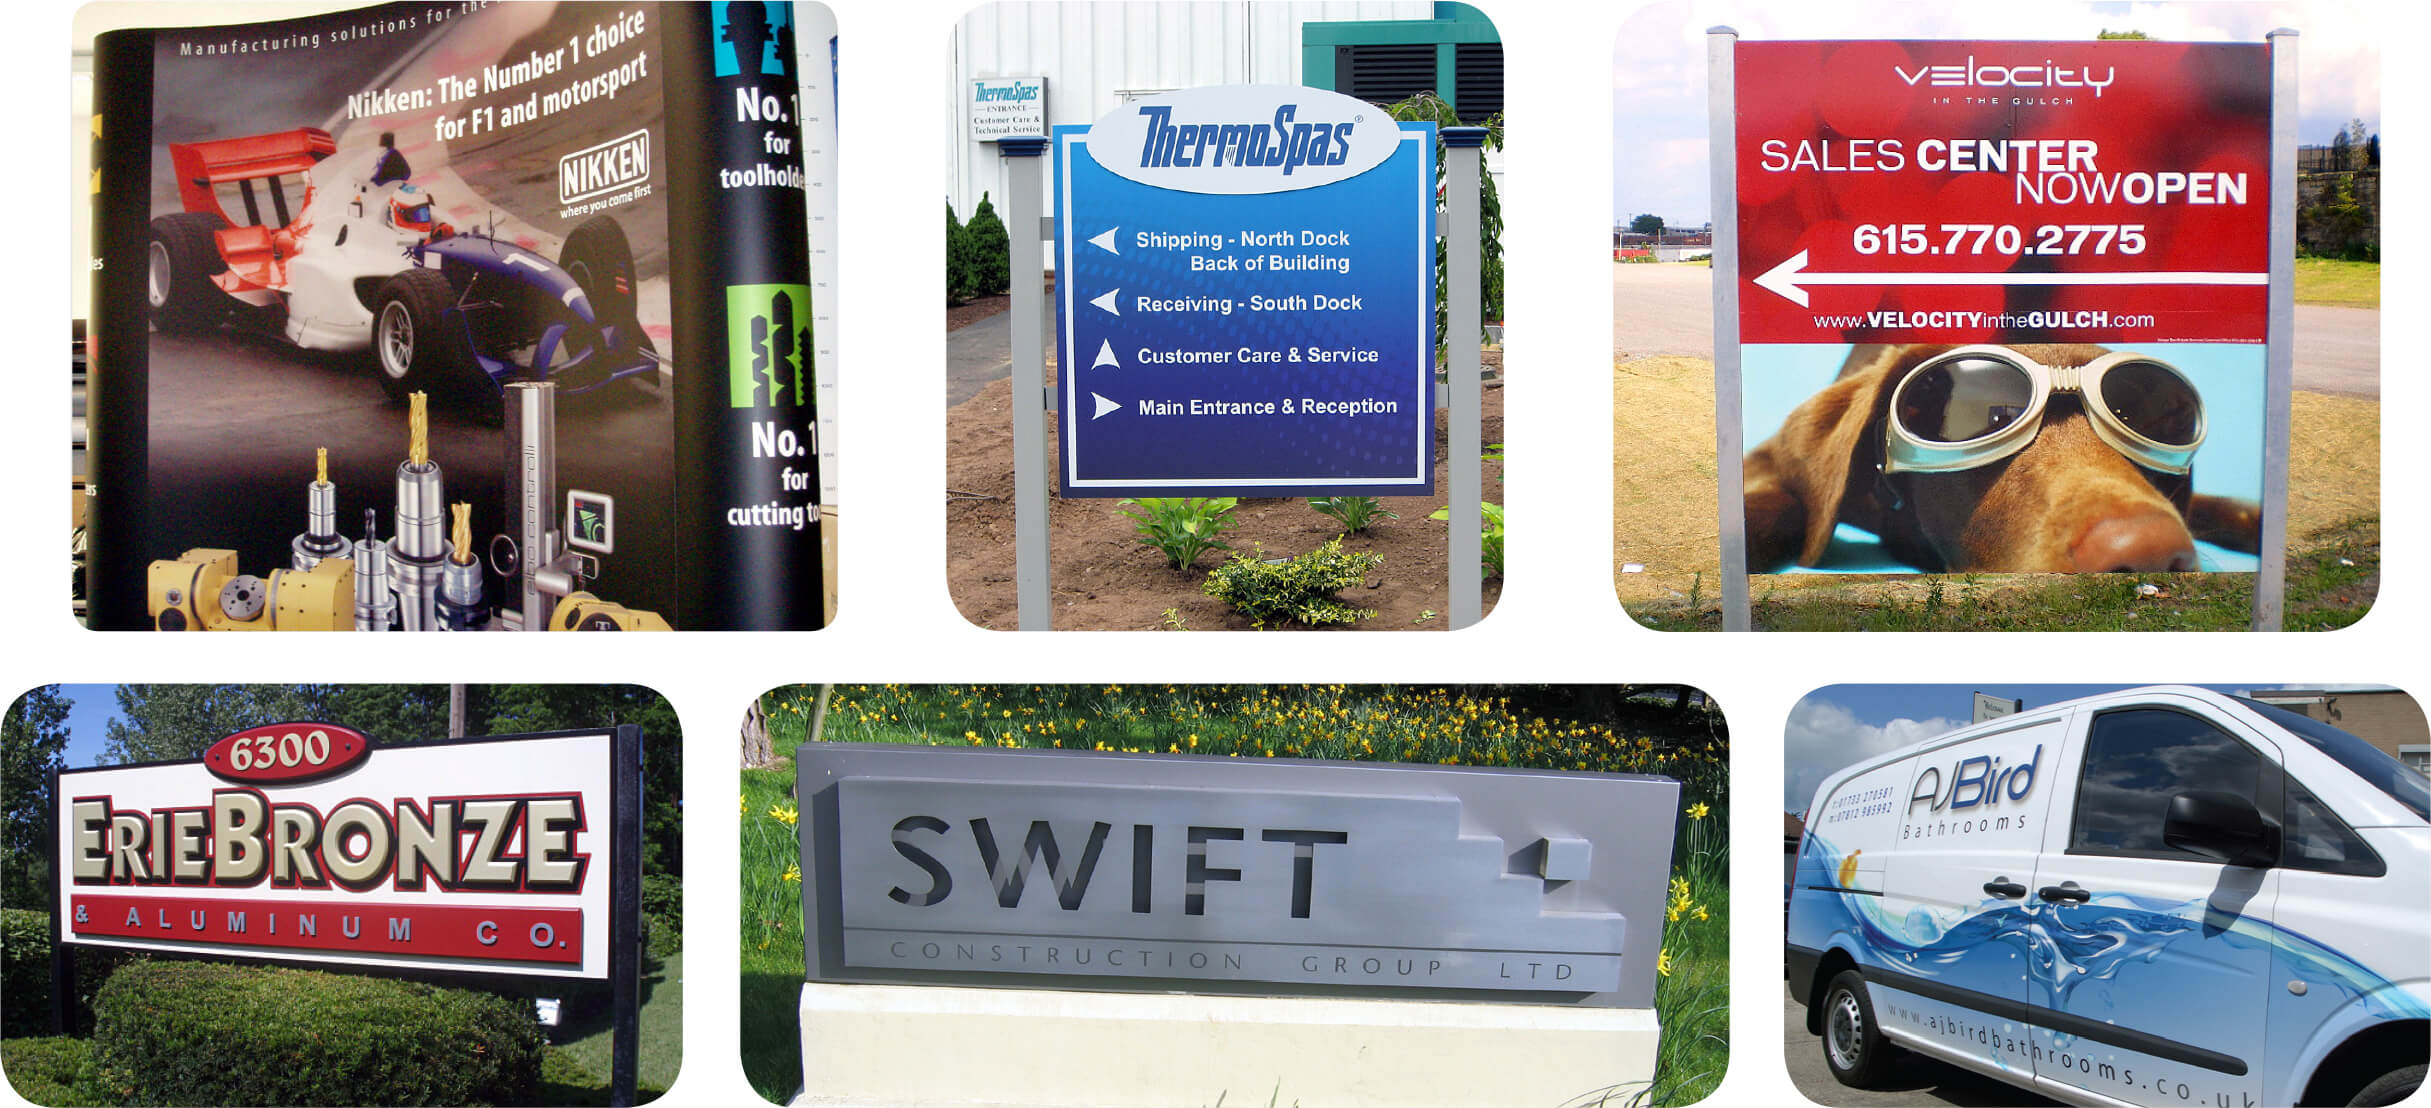 examples of interior and exterior warehouse signage